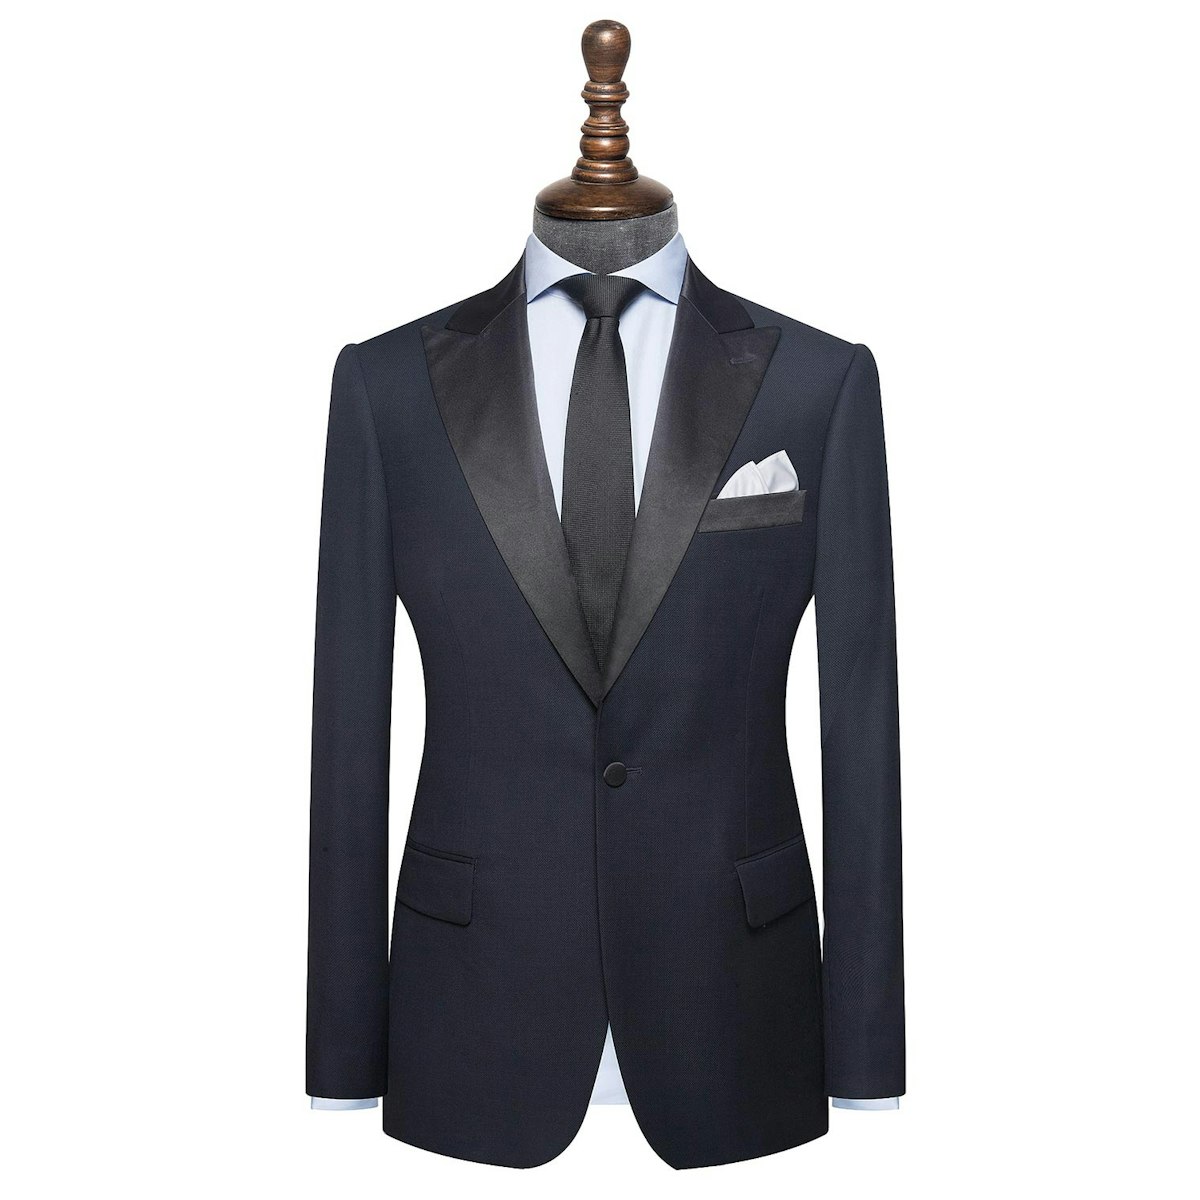 InStitchu Collection The Buckingham mens suit